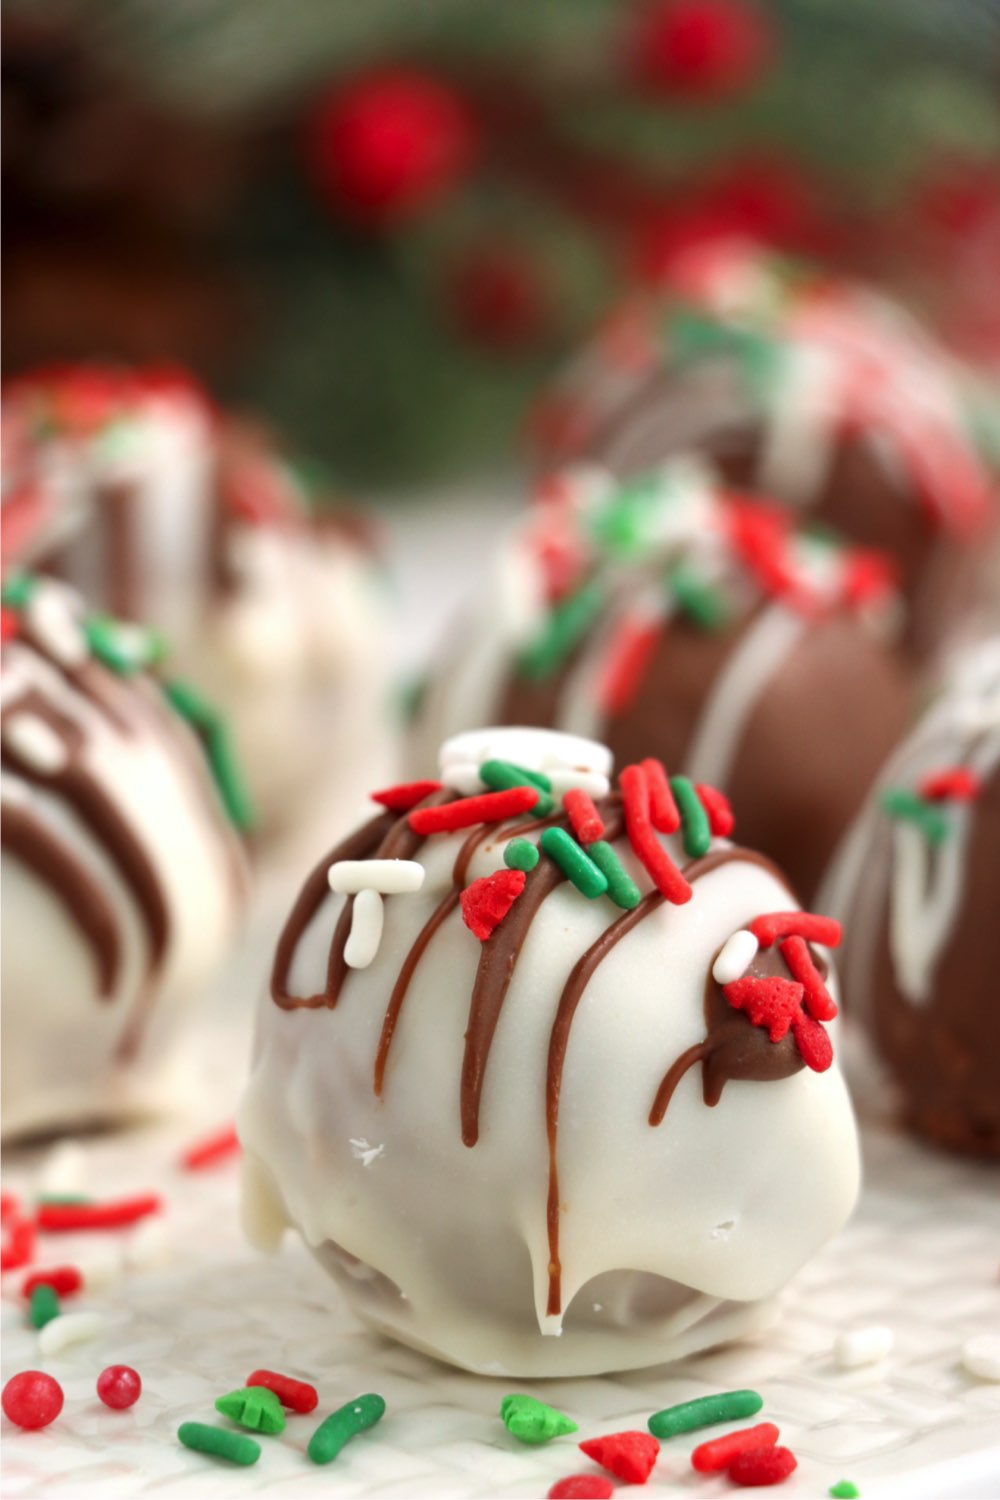 up close view of white chocolate covered Christmas truffle